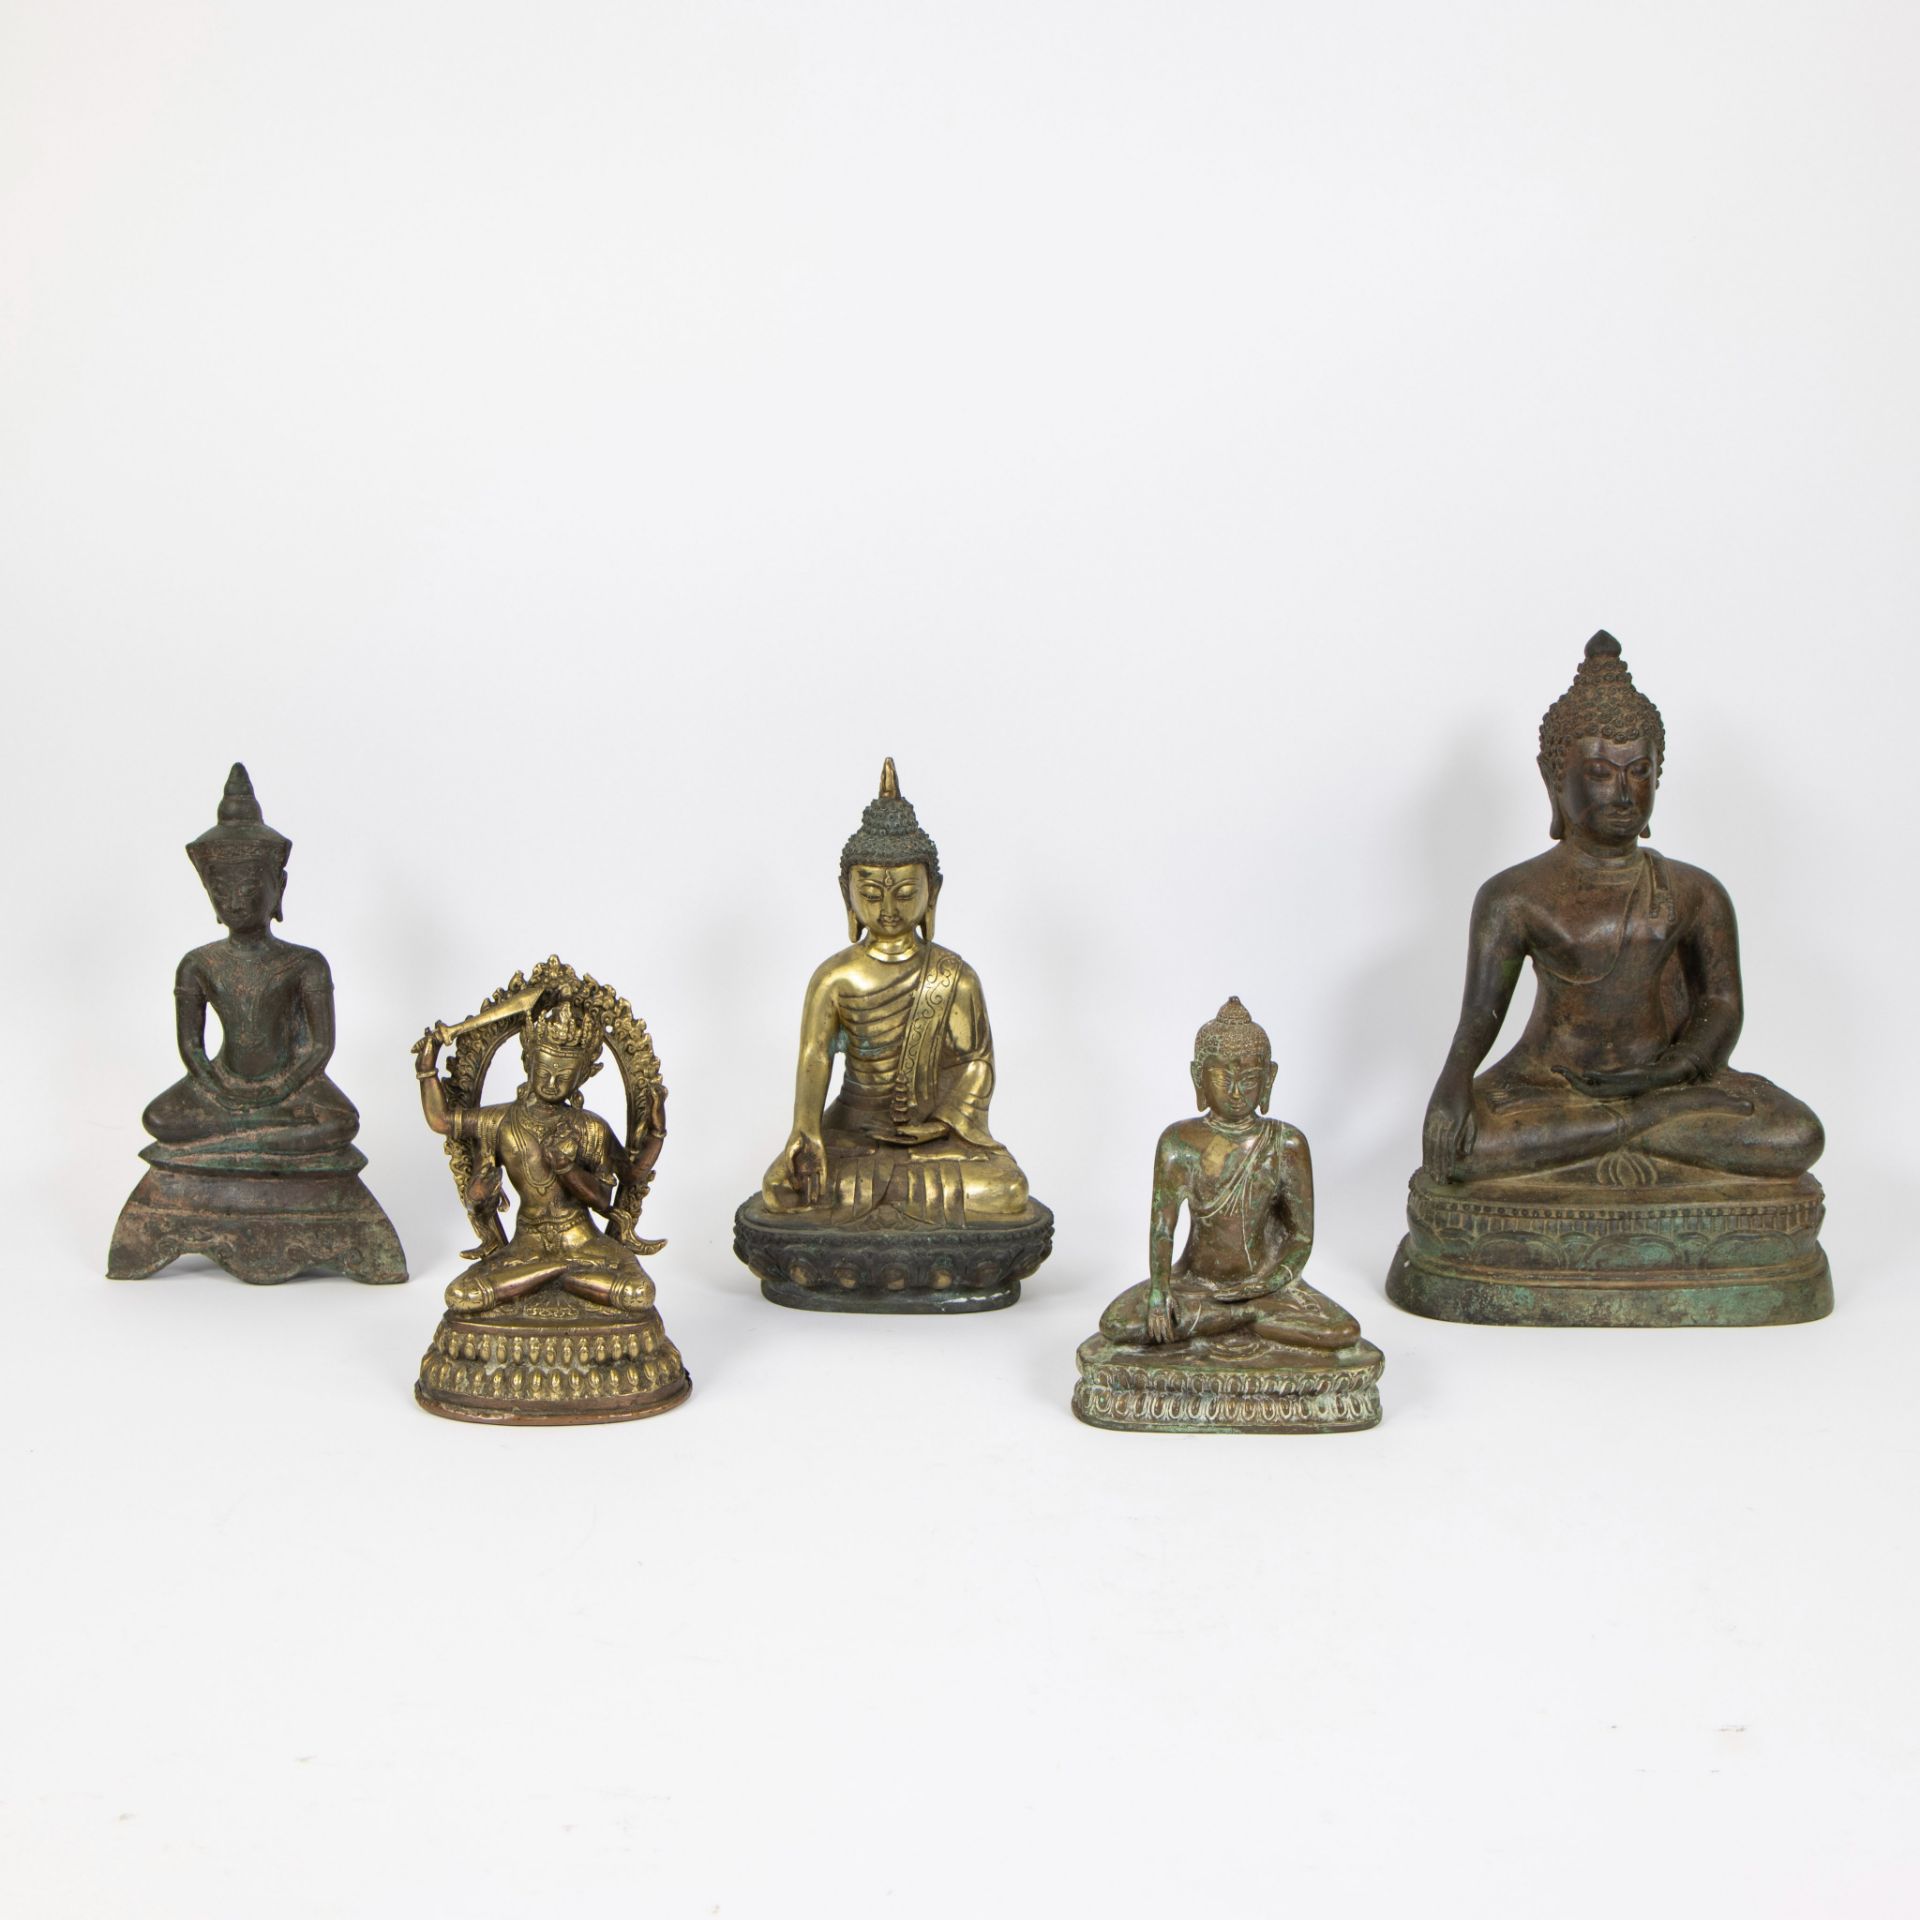 Collection of 5 Buddhas, Thailand